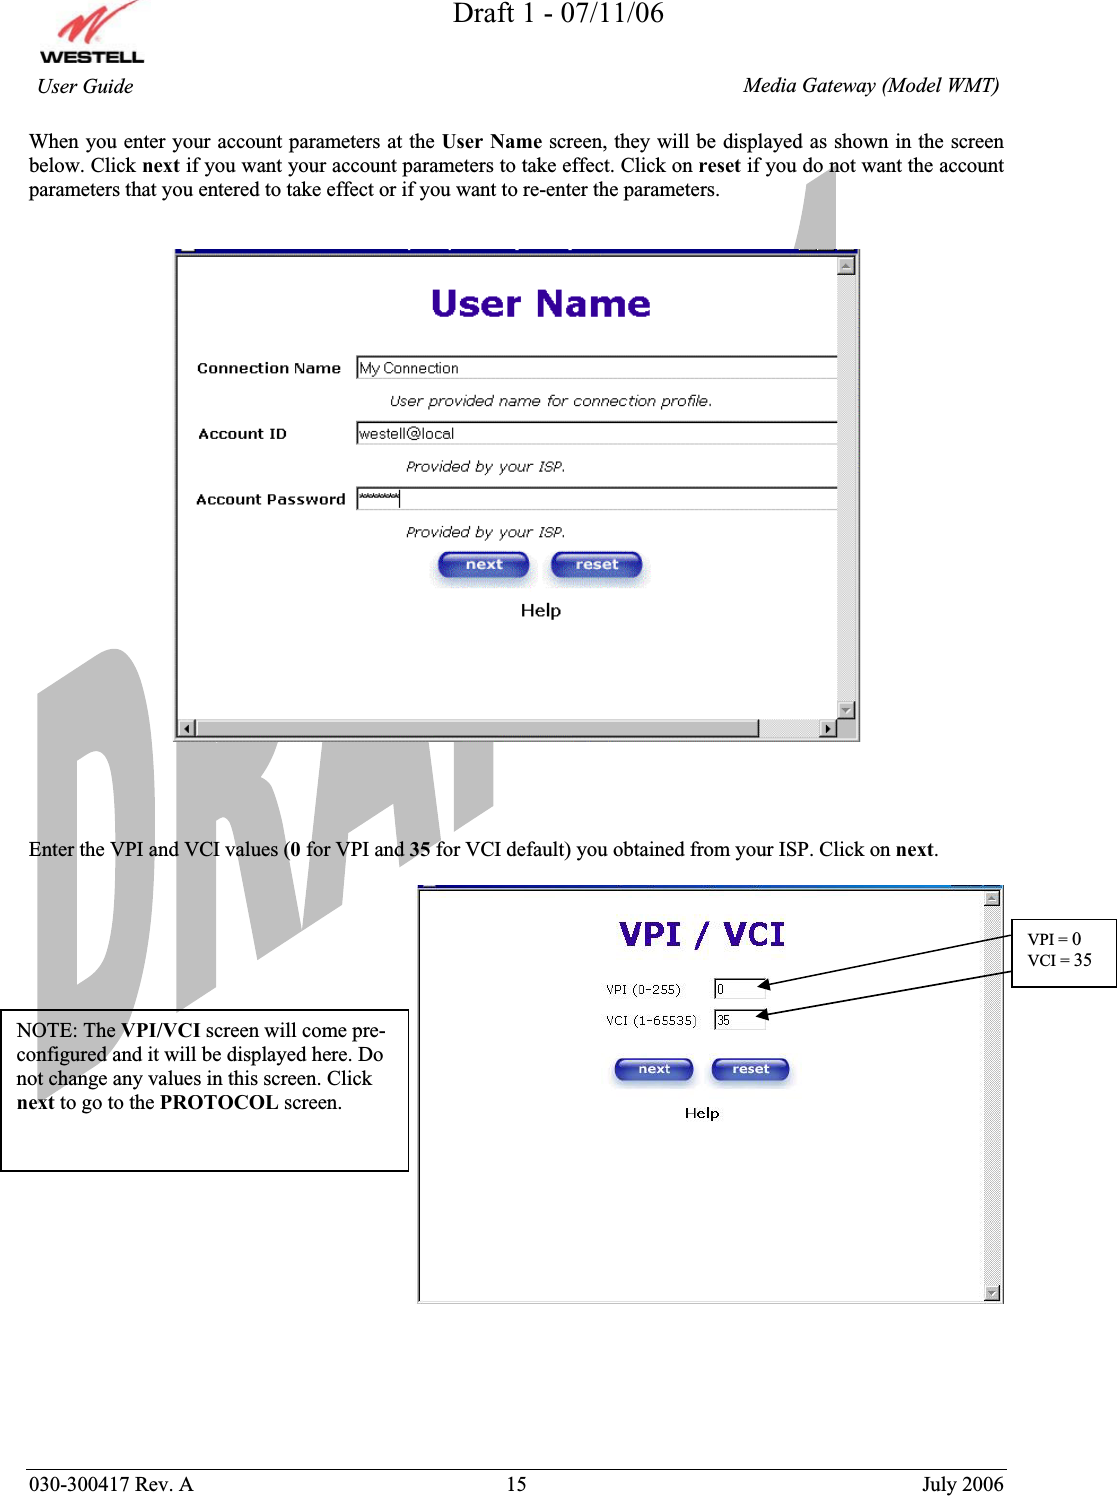 Draft 1 - 07/11/06030-300417 Rev. A  15  July 2006  Media Gateway (Model WMT) User Guide When you enter your account parameters at the User Name screen, they will be displayed as shown in the screen below. Click next if you want your account parameters to take effect. Click on reset if you do not want the account parameters that you entered to take effect or if you want to re-enter the parameters. Enter the VPI and VCI values (0 for VPI and 35 for VCI default) you obtained from your ISP. Click on next.NOTE: The VPI/VCI screen will come pre-configured and it will be displayed here. Do not change any values in this screen. Click next to go to the PROTOCOL screen. VPI = 0VCI = 35